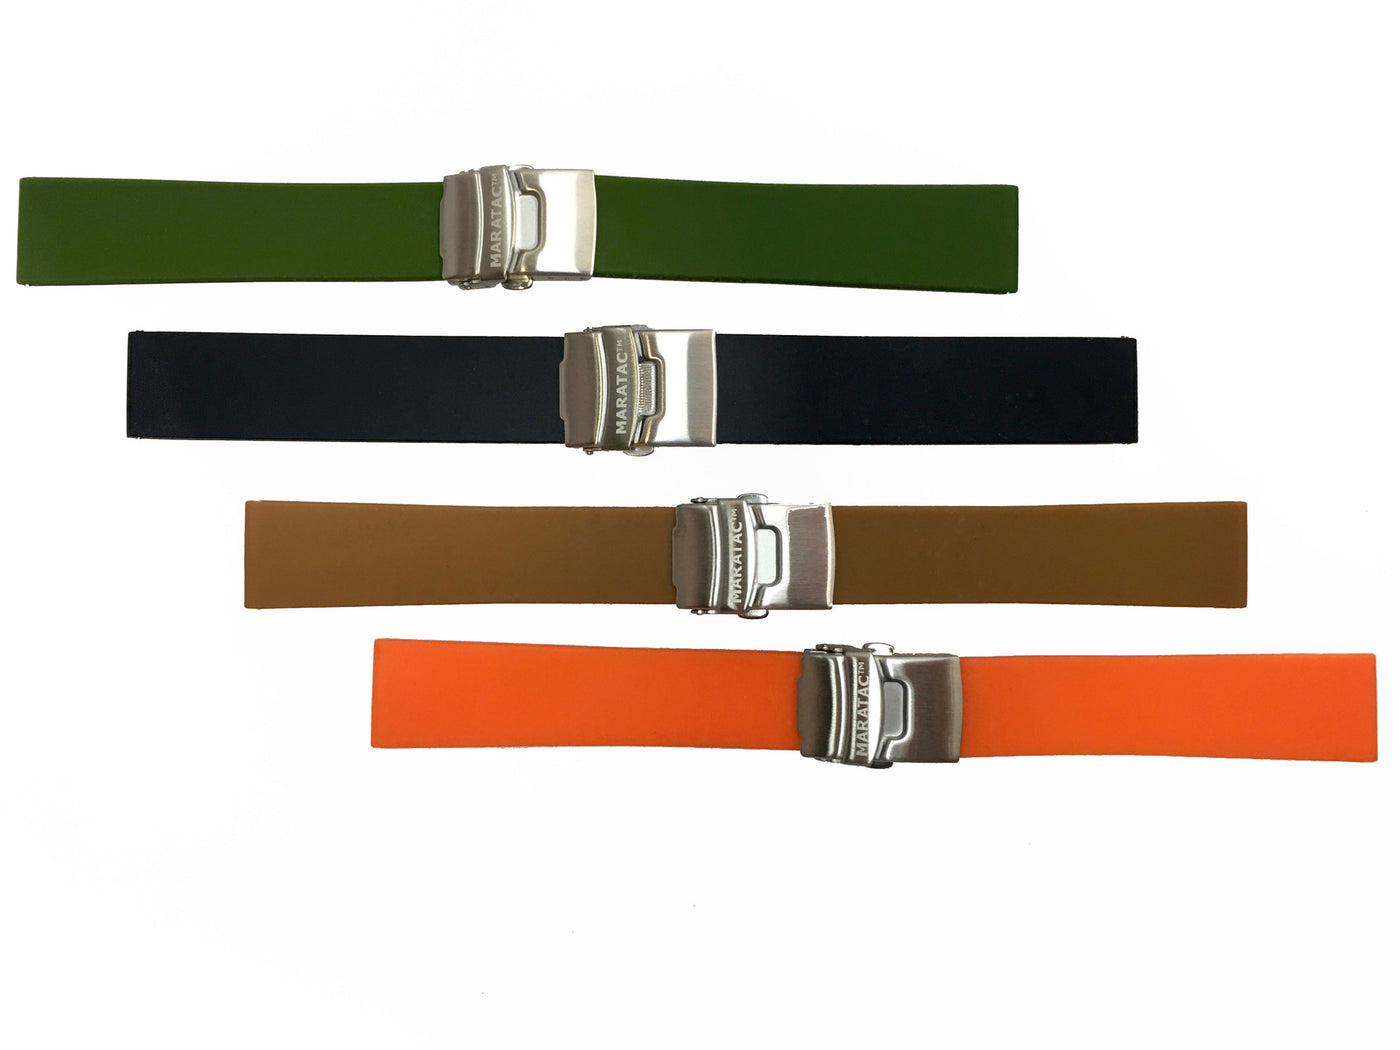 Cartier watch strap buckle instructions - Read before you buy